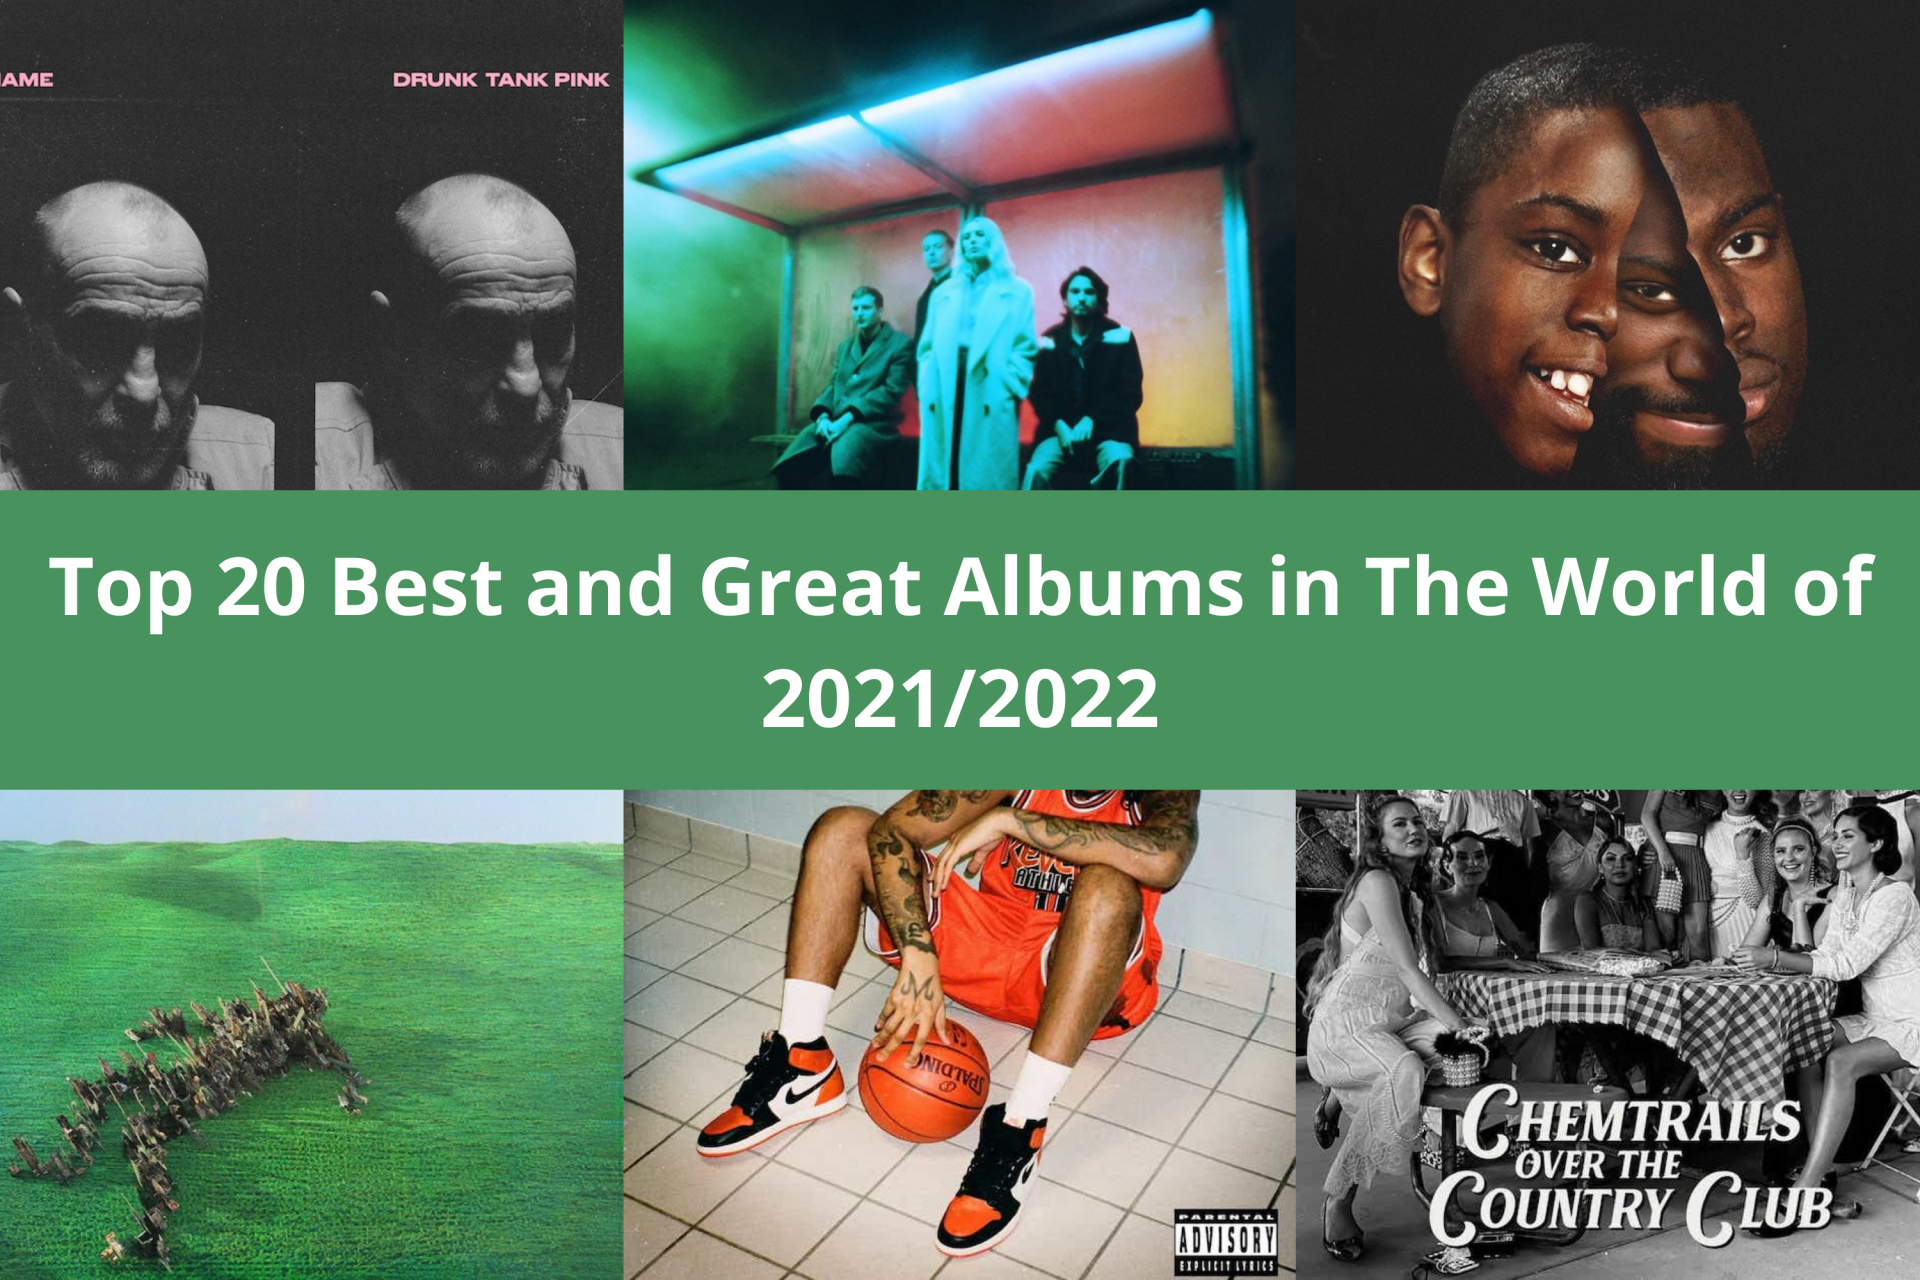 Top 20 Best and Great Albums in The World of 2021/2022